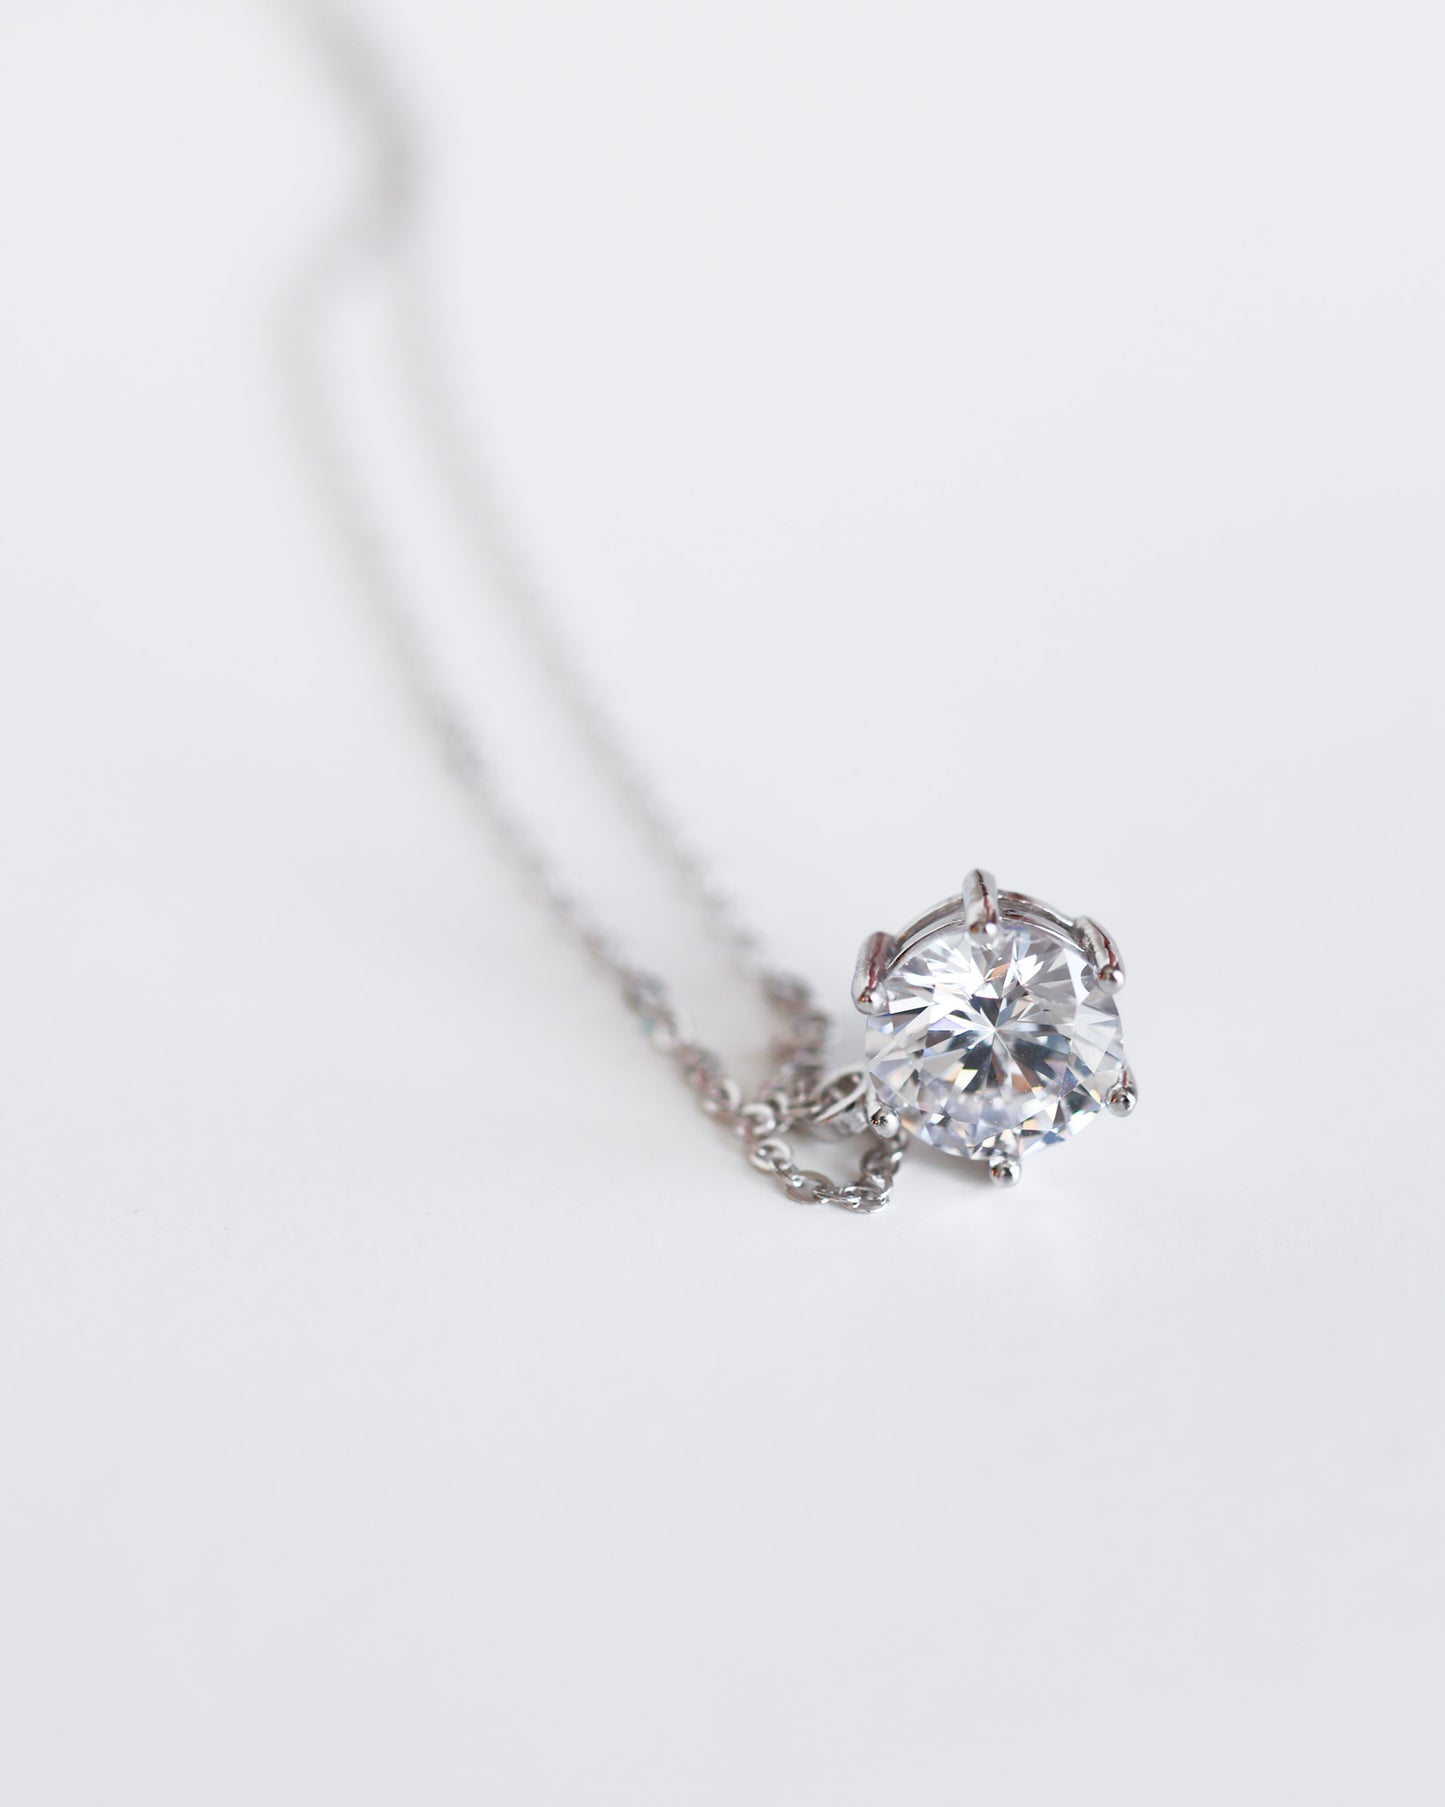 Silver necklace with 8.5mm solitaire zirconia